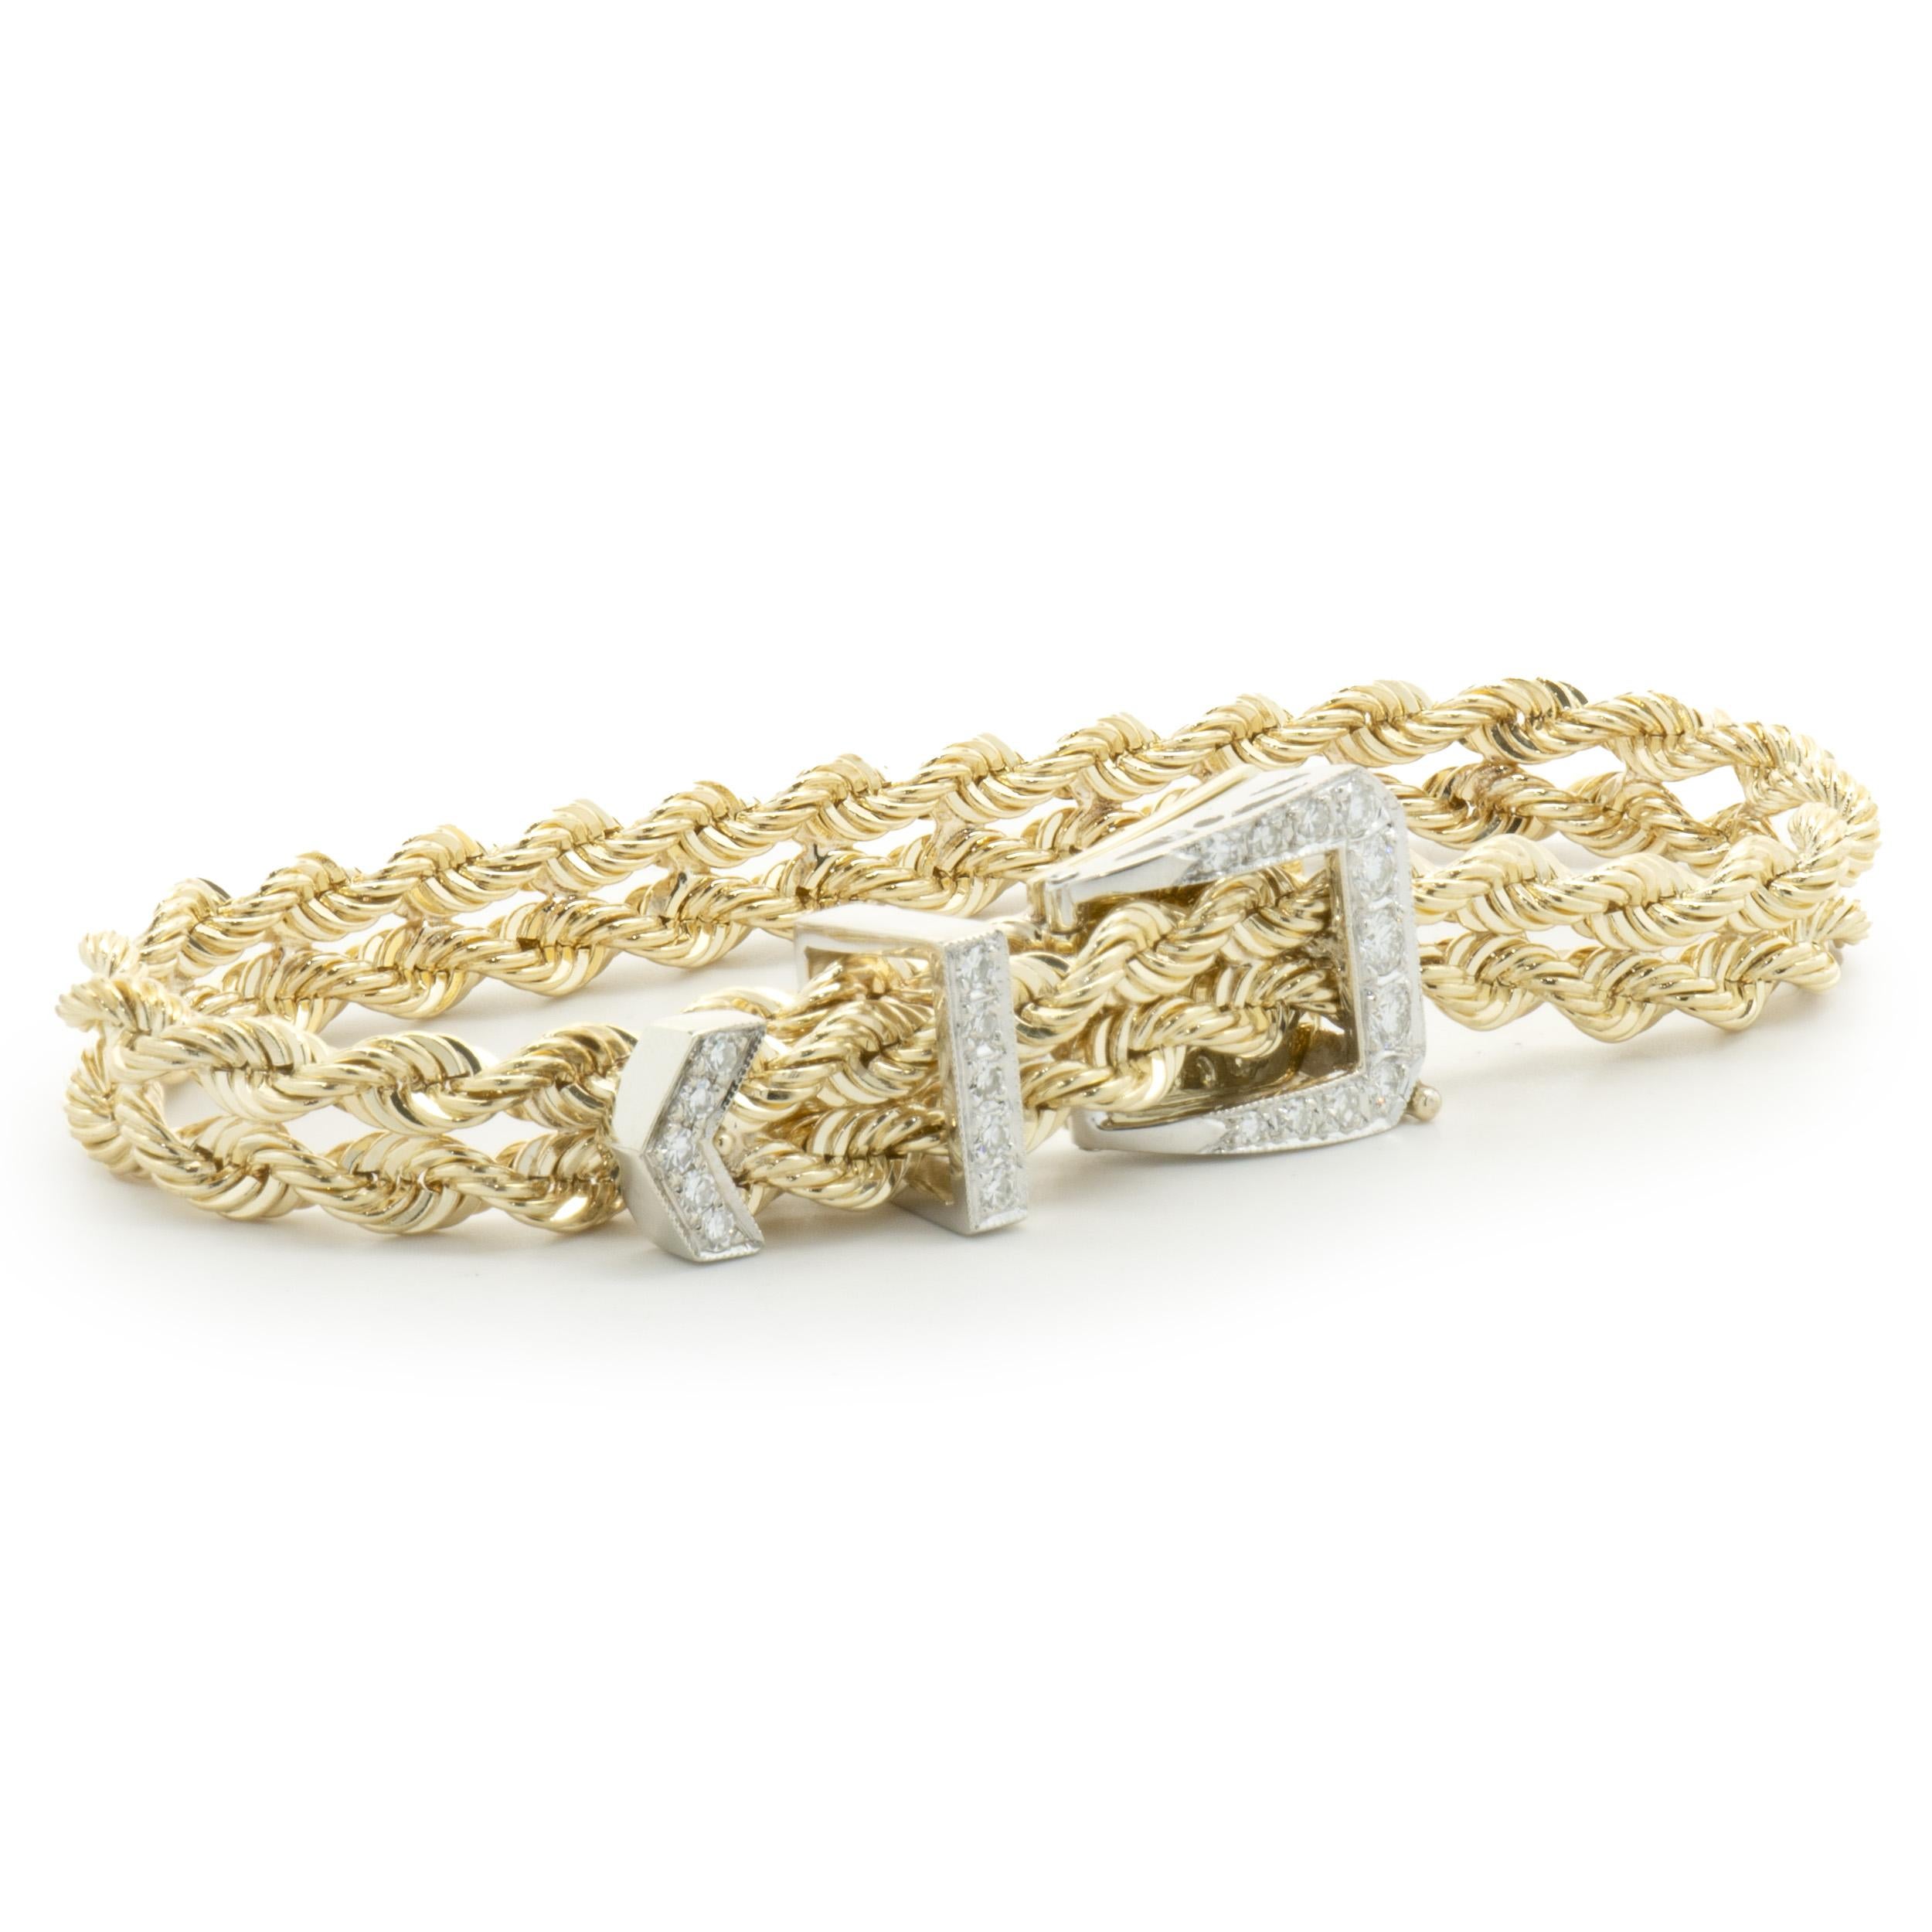 Designer: custom design
Material: 14K yellow gold
Diamond: 21 round brilliant cut = 0.50cttw
Color: G
Clarity: VS2
Dimensions: bracelet will fit up to a 8.25-inch wrist
Weight: 26.11 grams
